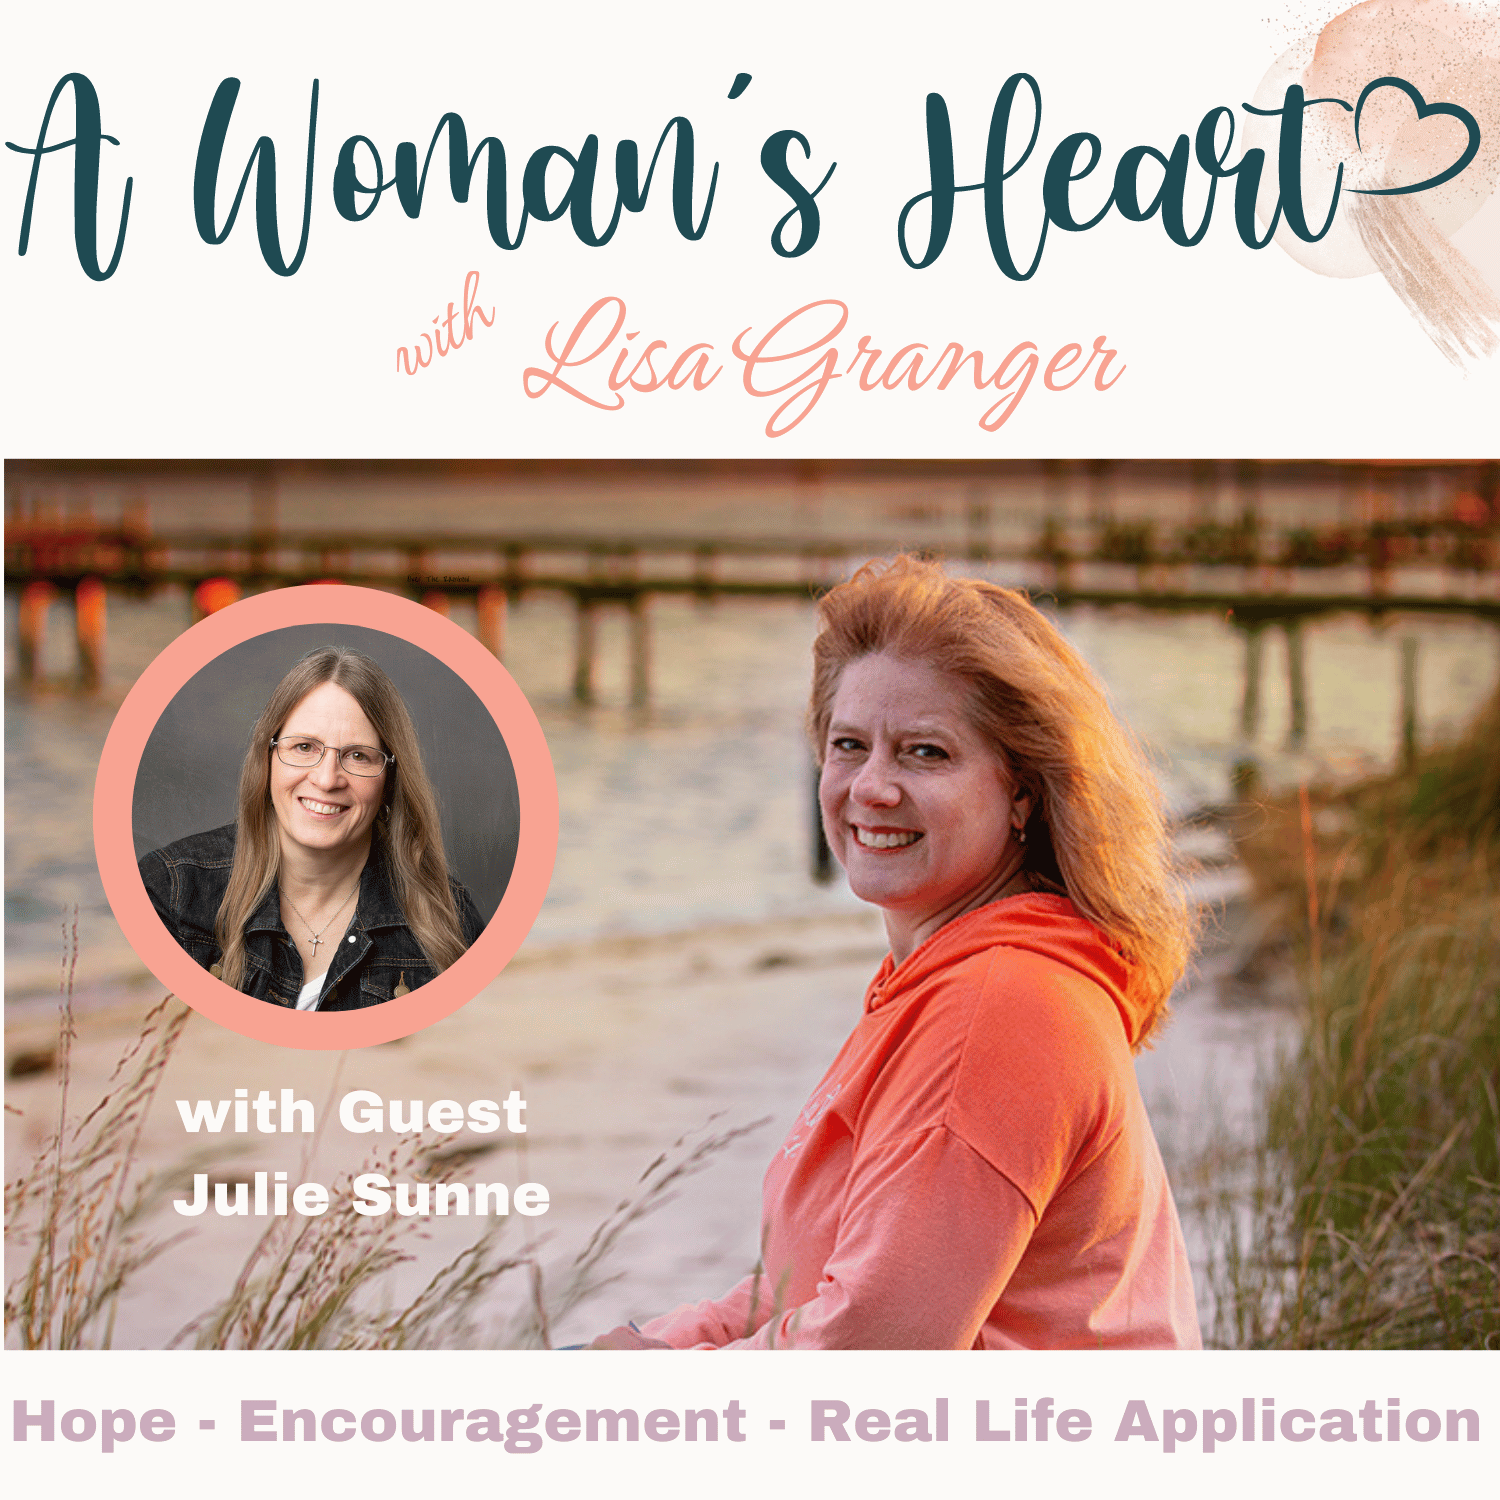 Julie Sunne: Reclaiming Hope by Remembering Who God Is